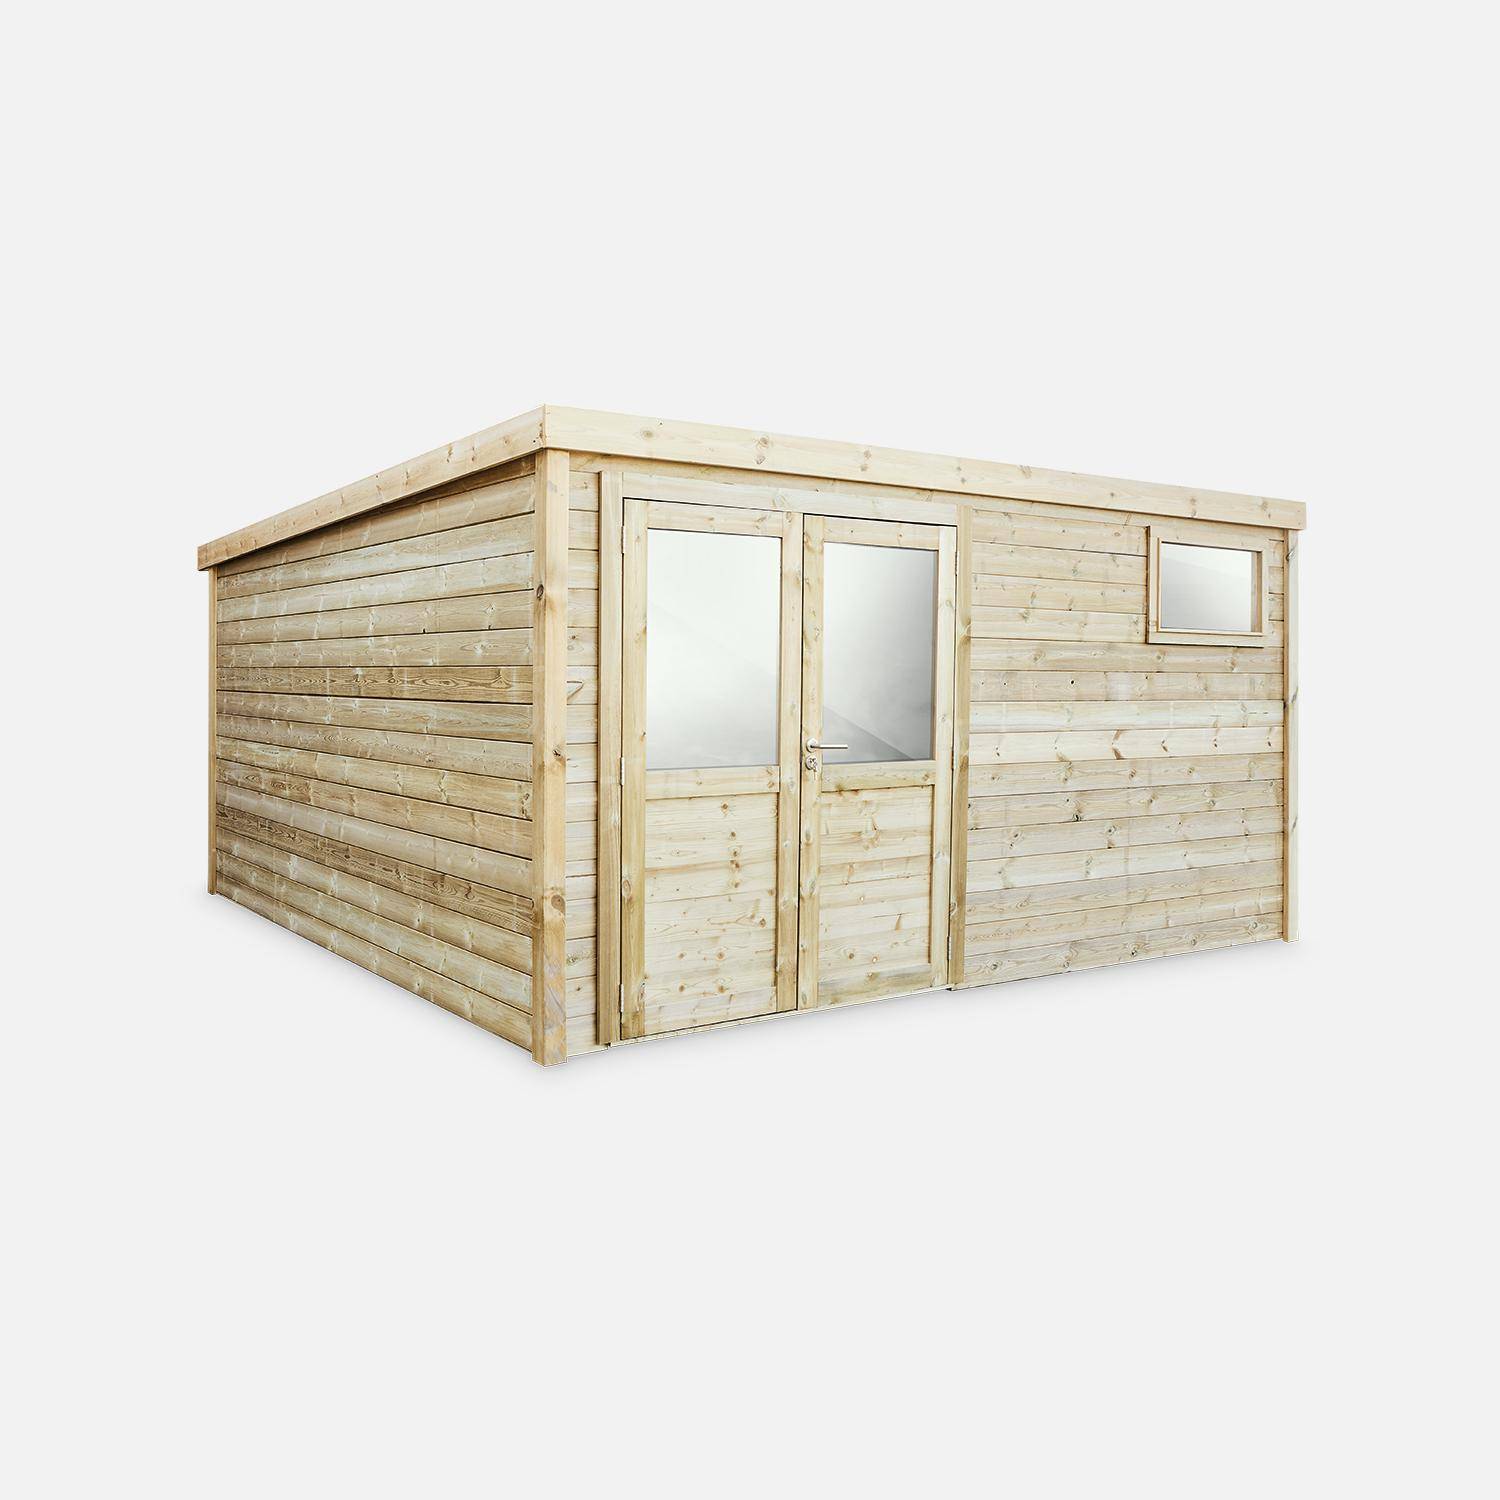 Wooden Garden Shed 16.3m², Treated Nordic Fir with Autoclave Treatment, Thickness 27mm Photo3